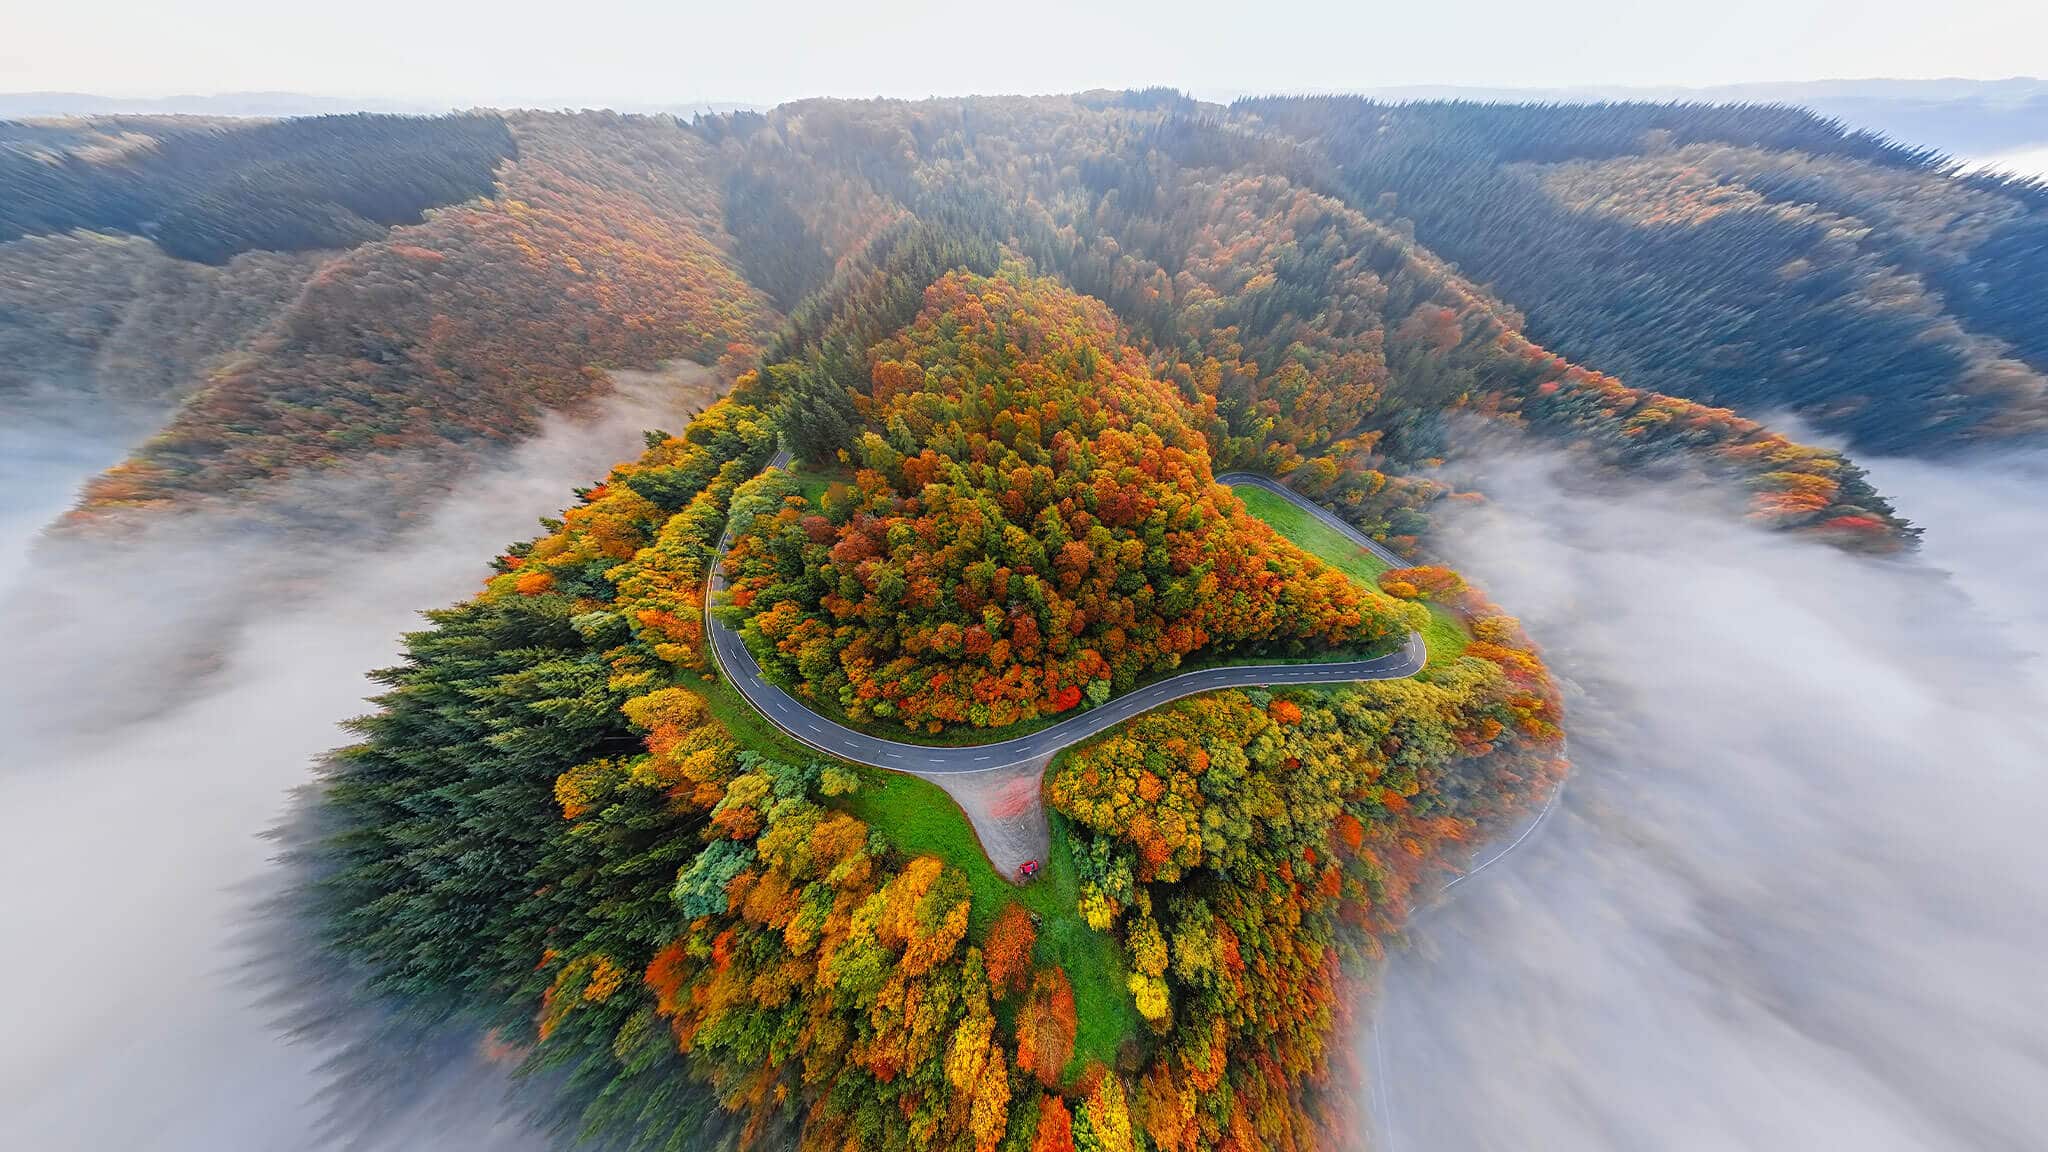 Aerial fish eye shot of tree covered hills and road in the mist